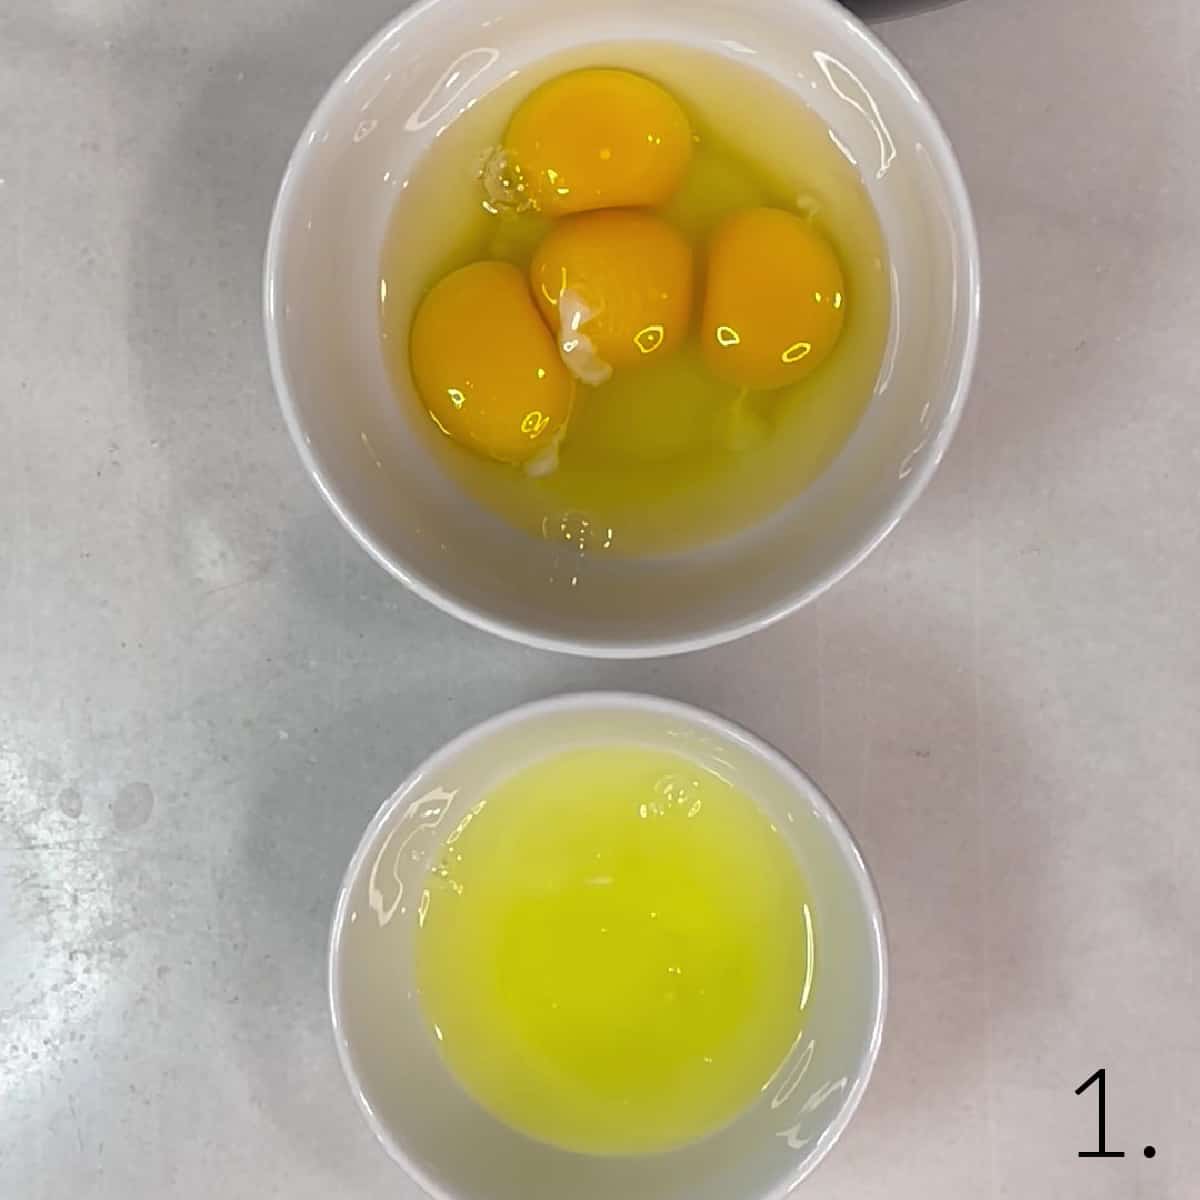 Egg yolks and egg whites in two separate dishes/